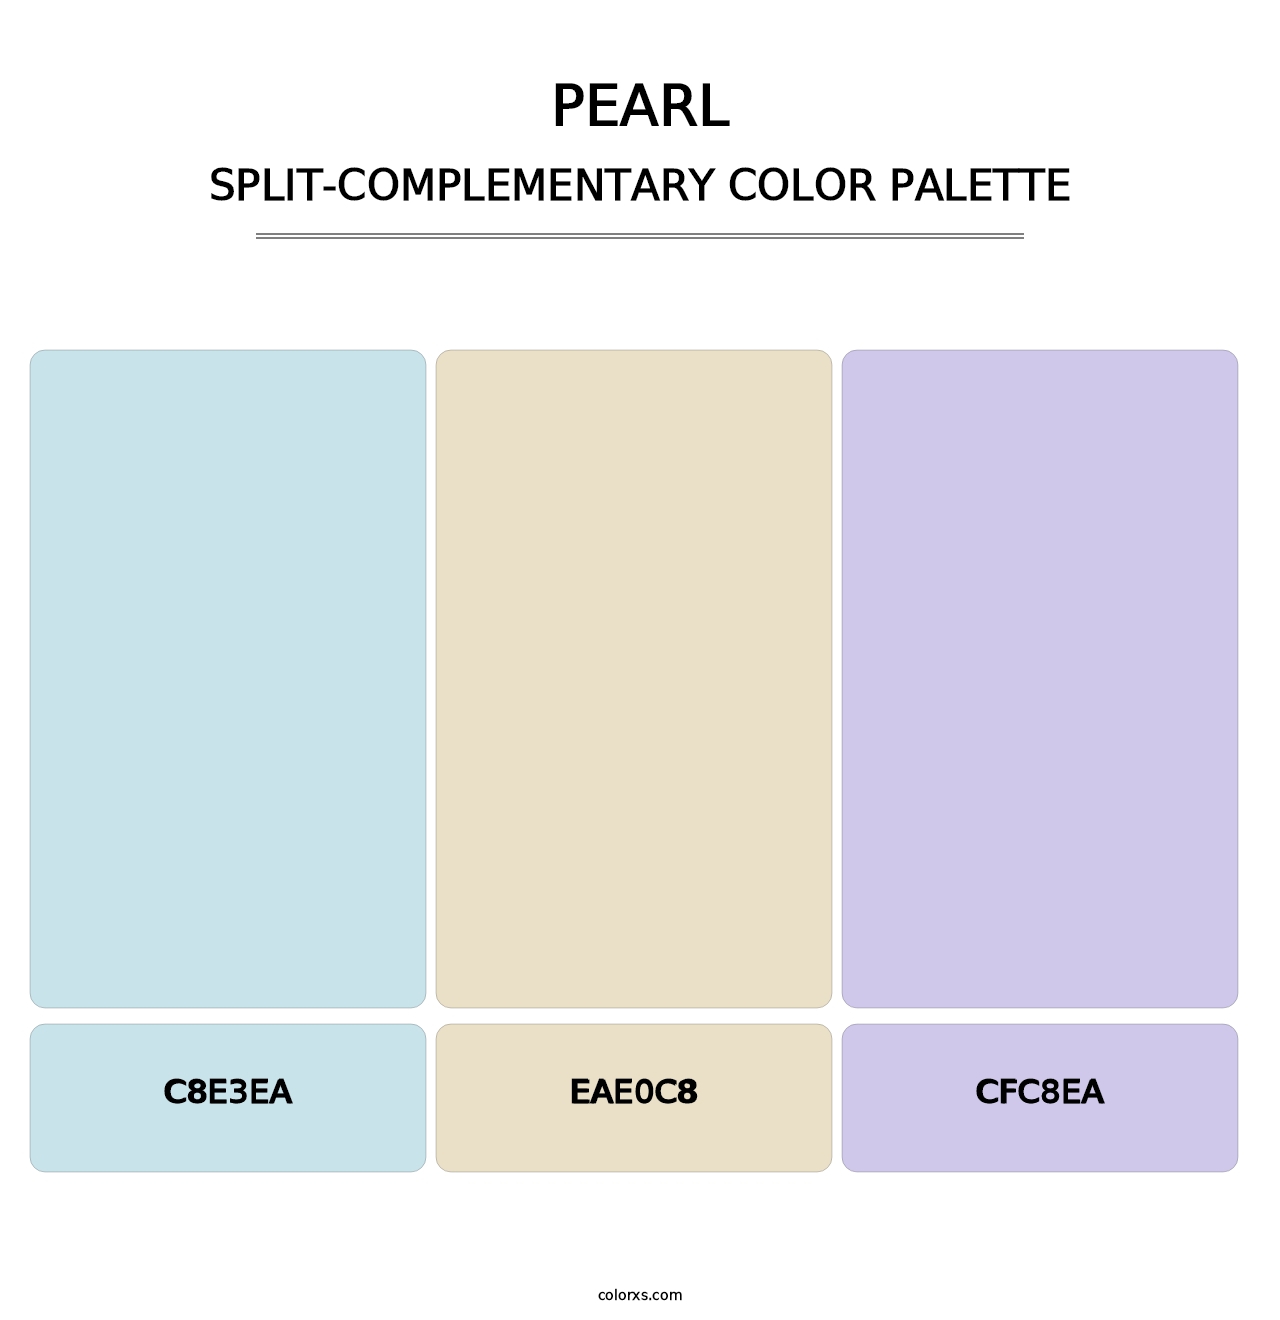 Pearl - Split-Complementary Color Palette